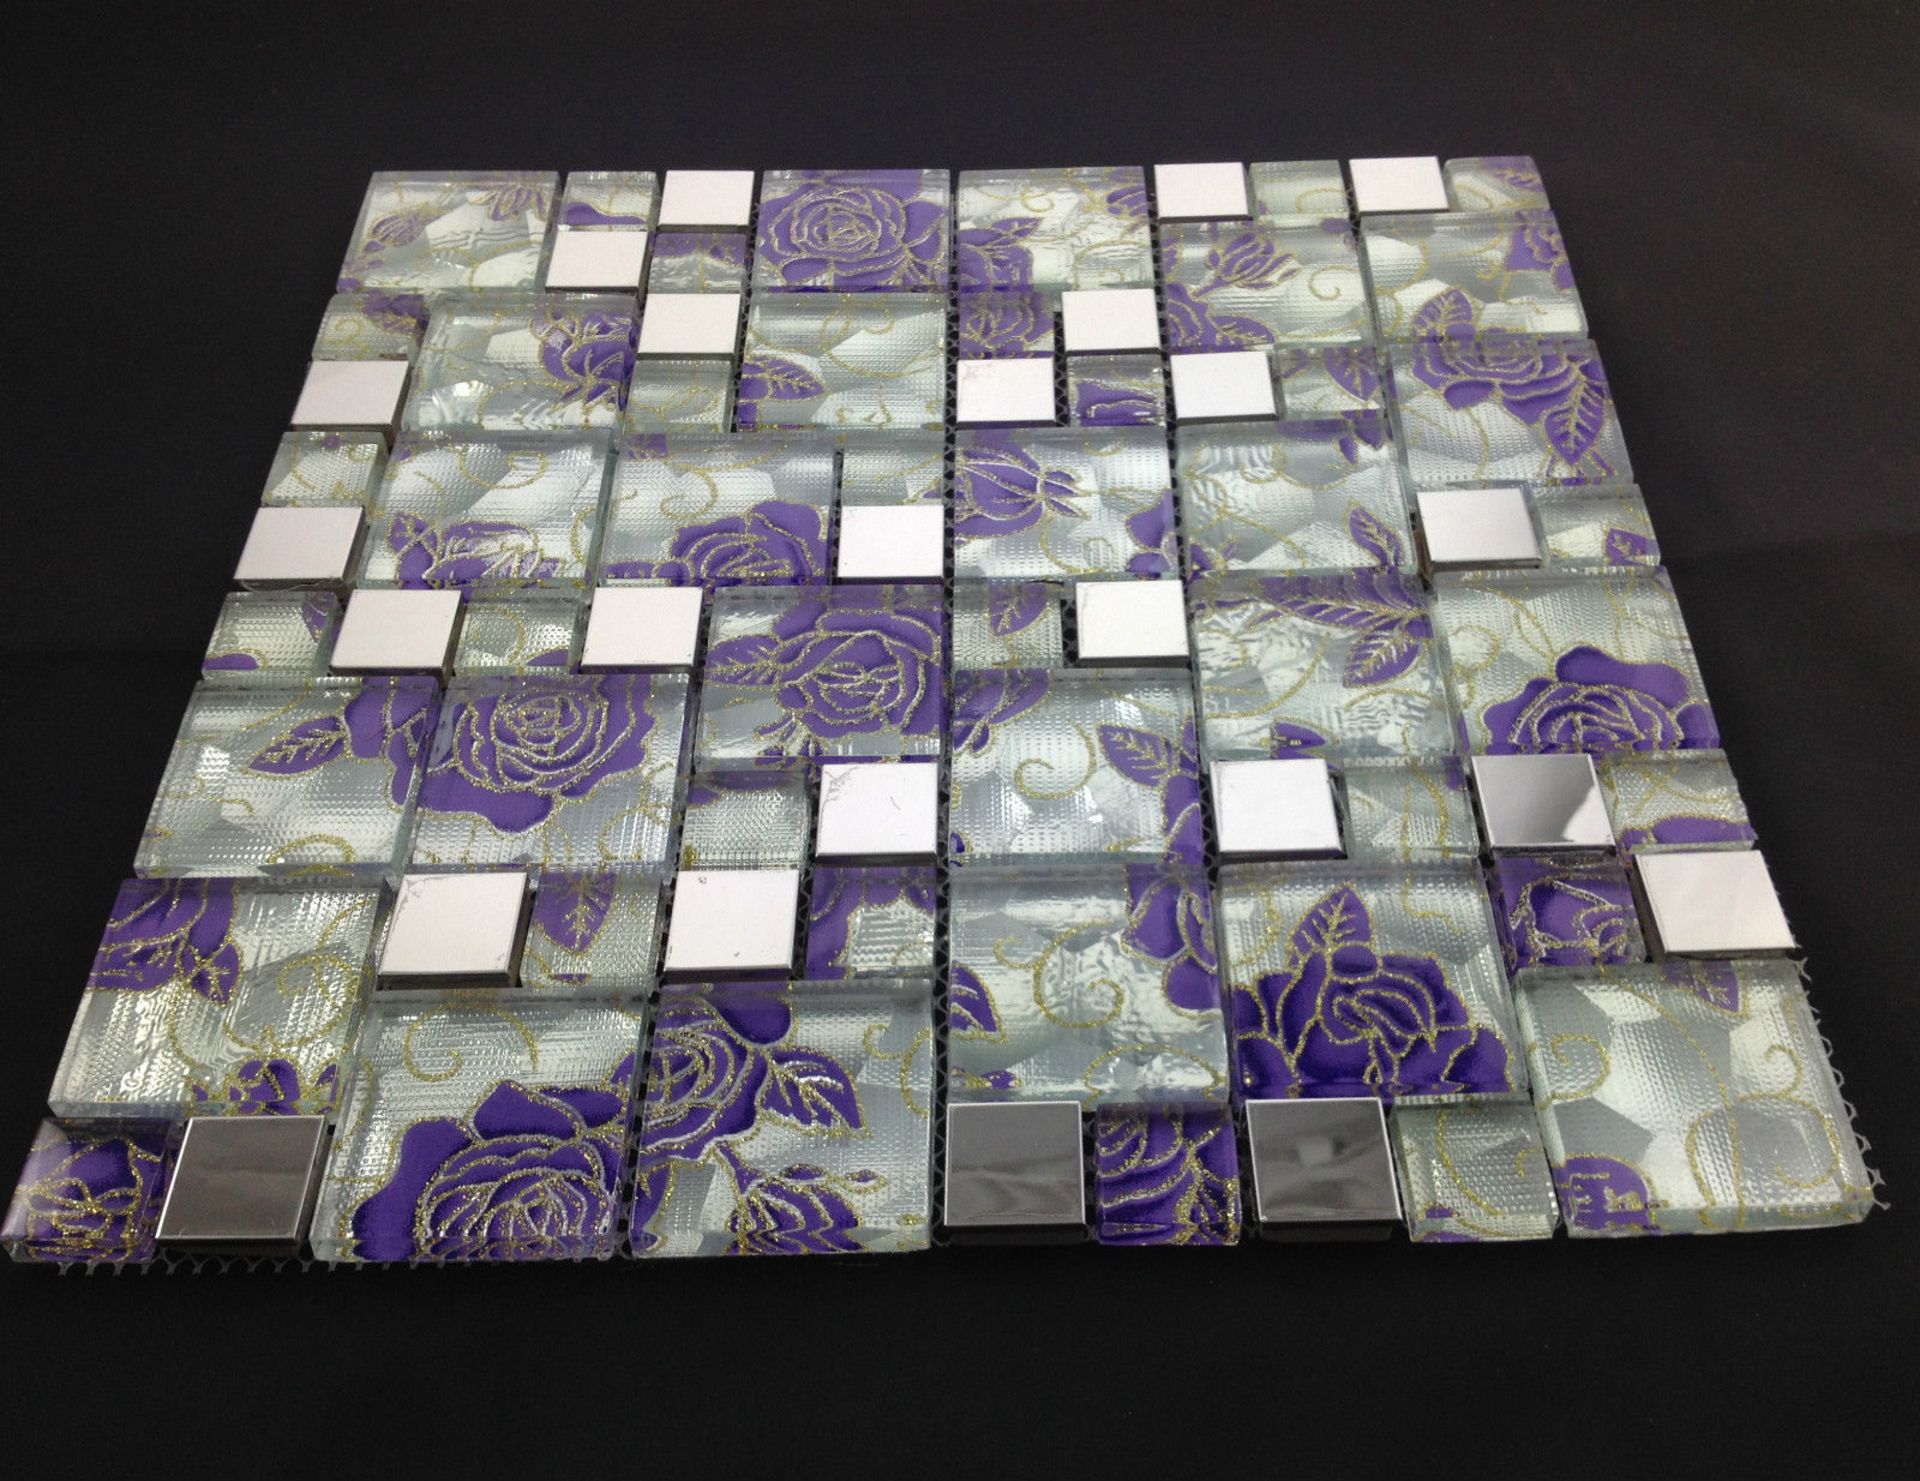 5 Square Metres - High Quality Glass/Stainless Steel Mosaic Tiles - Image 5 of 5